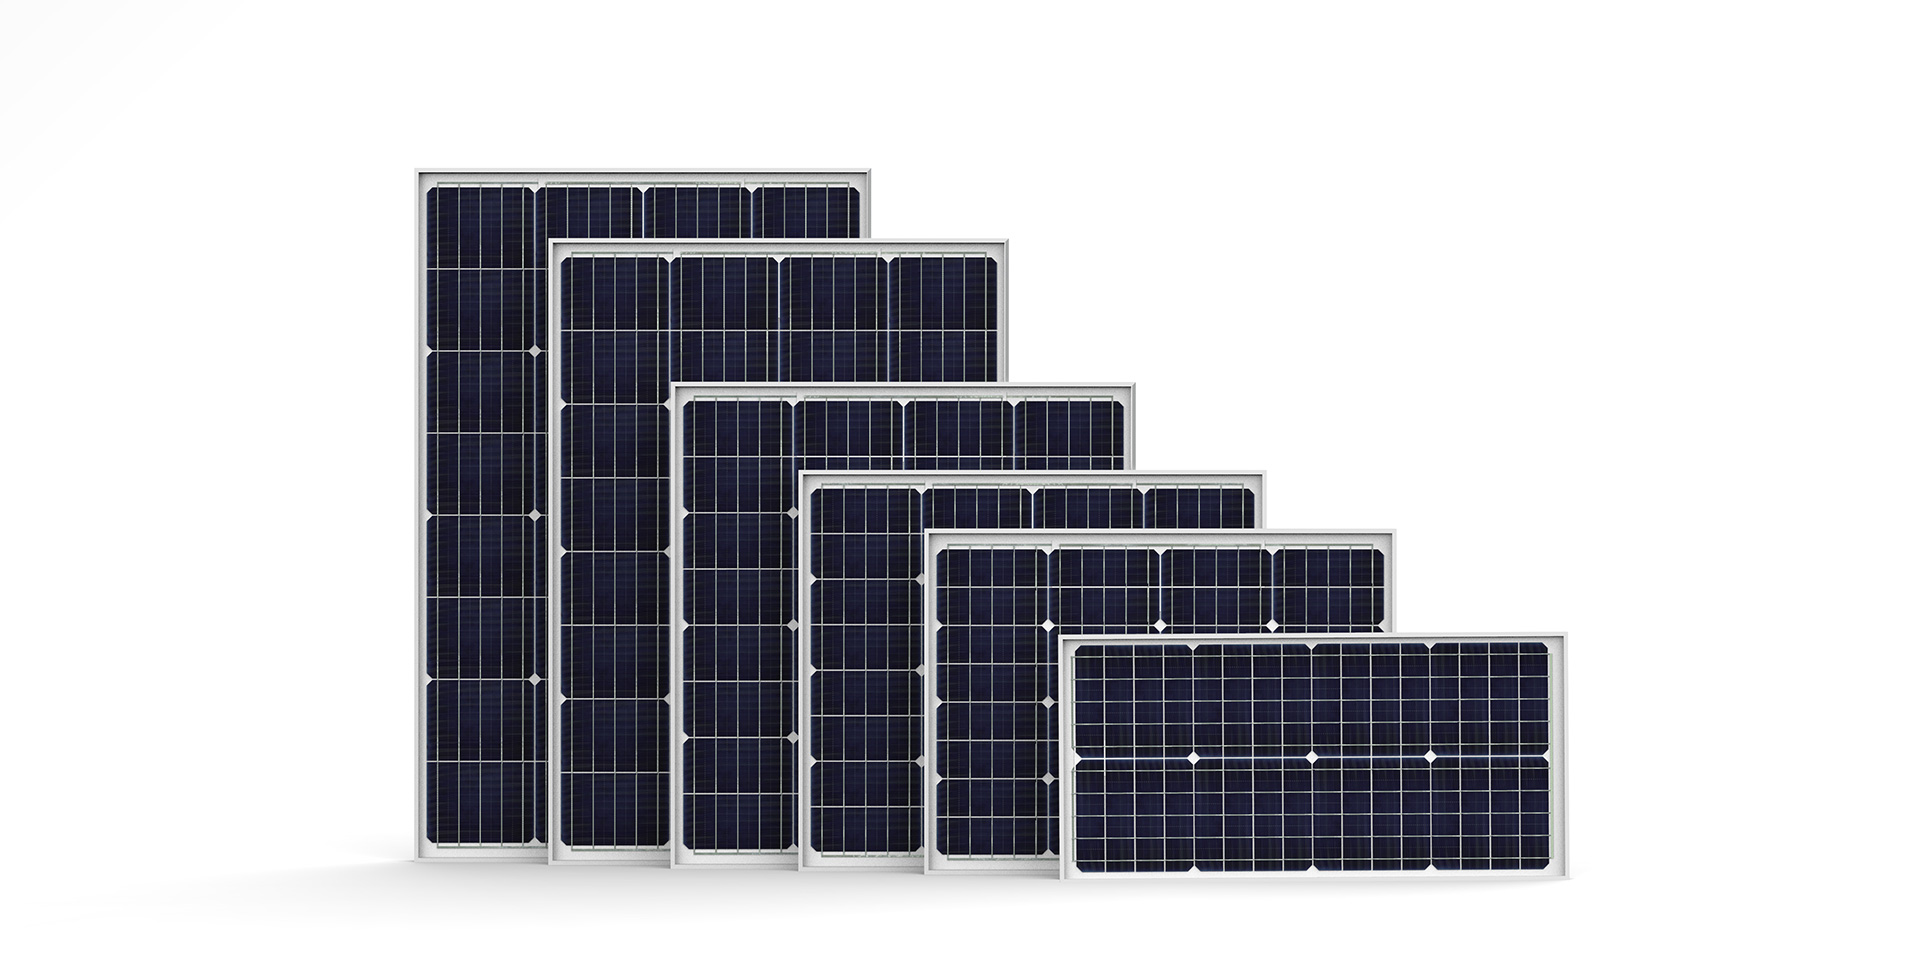 Four million off-grid modules produced